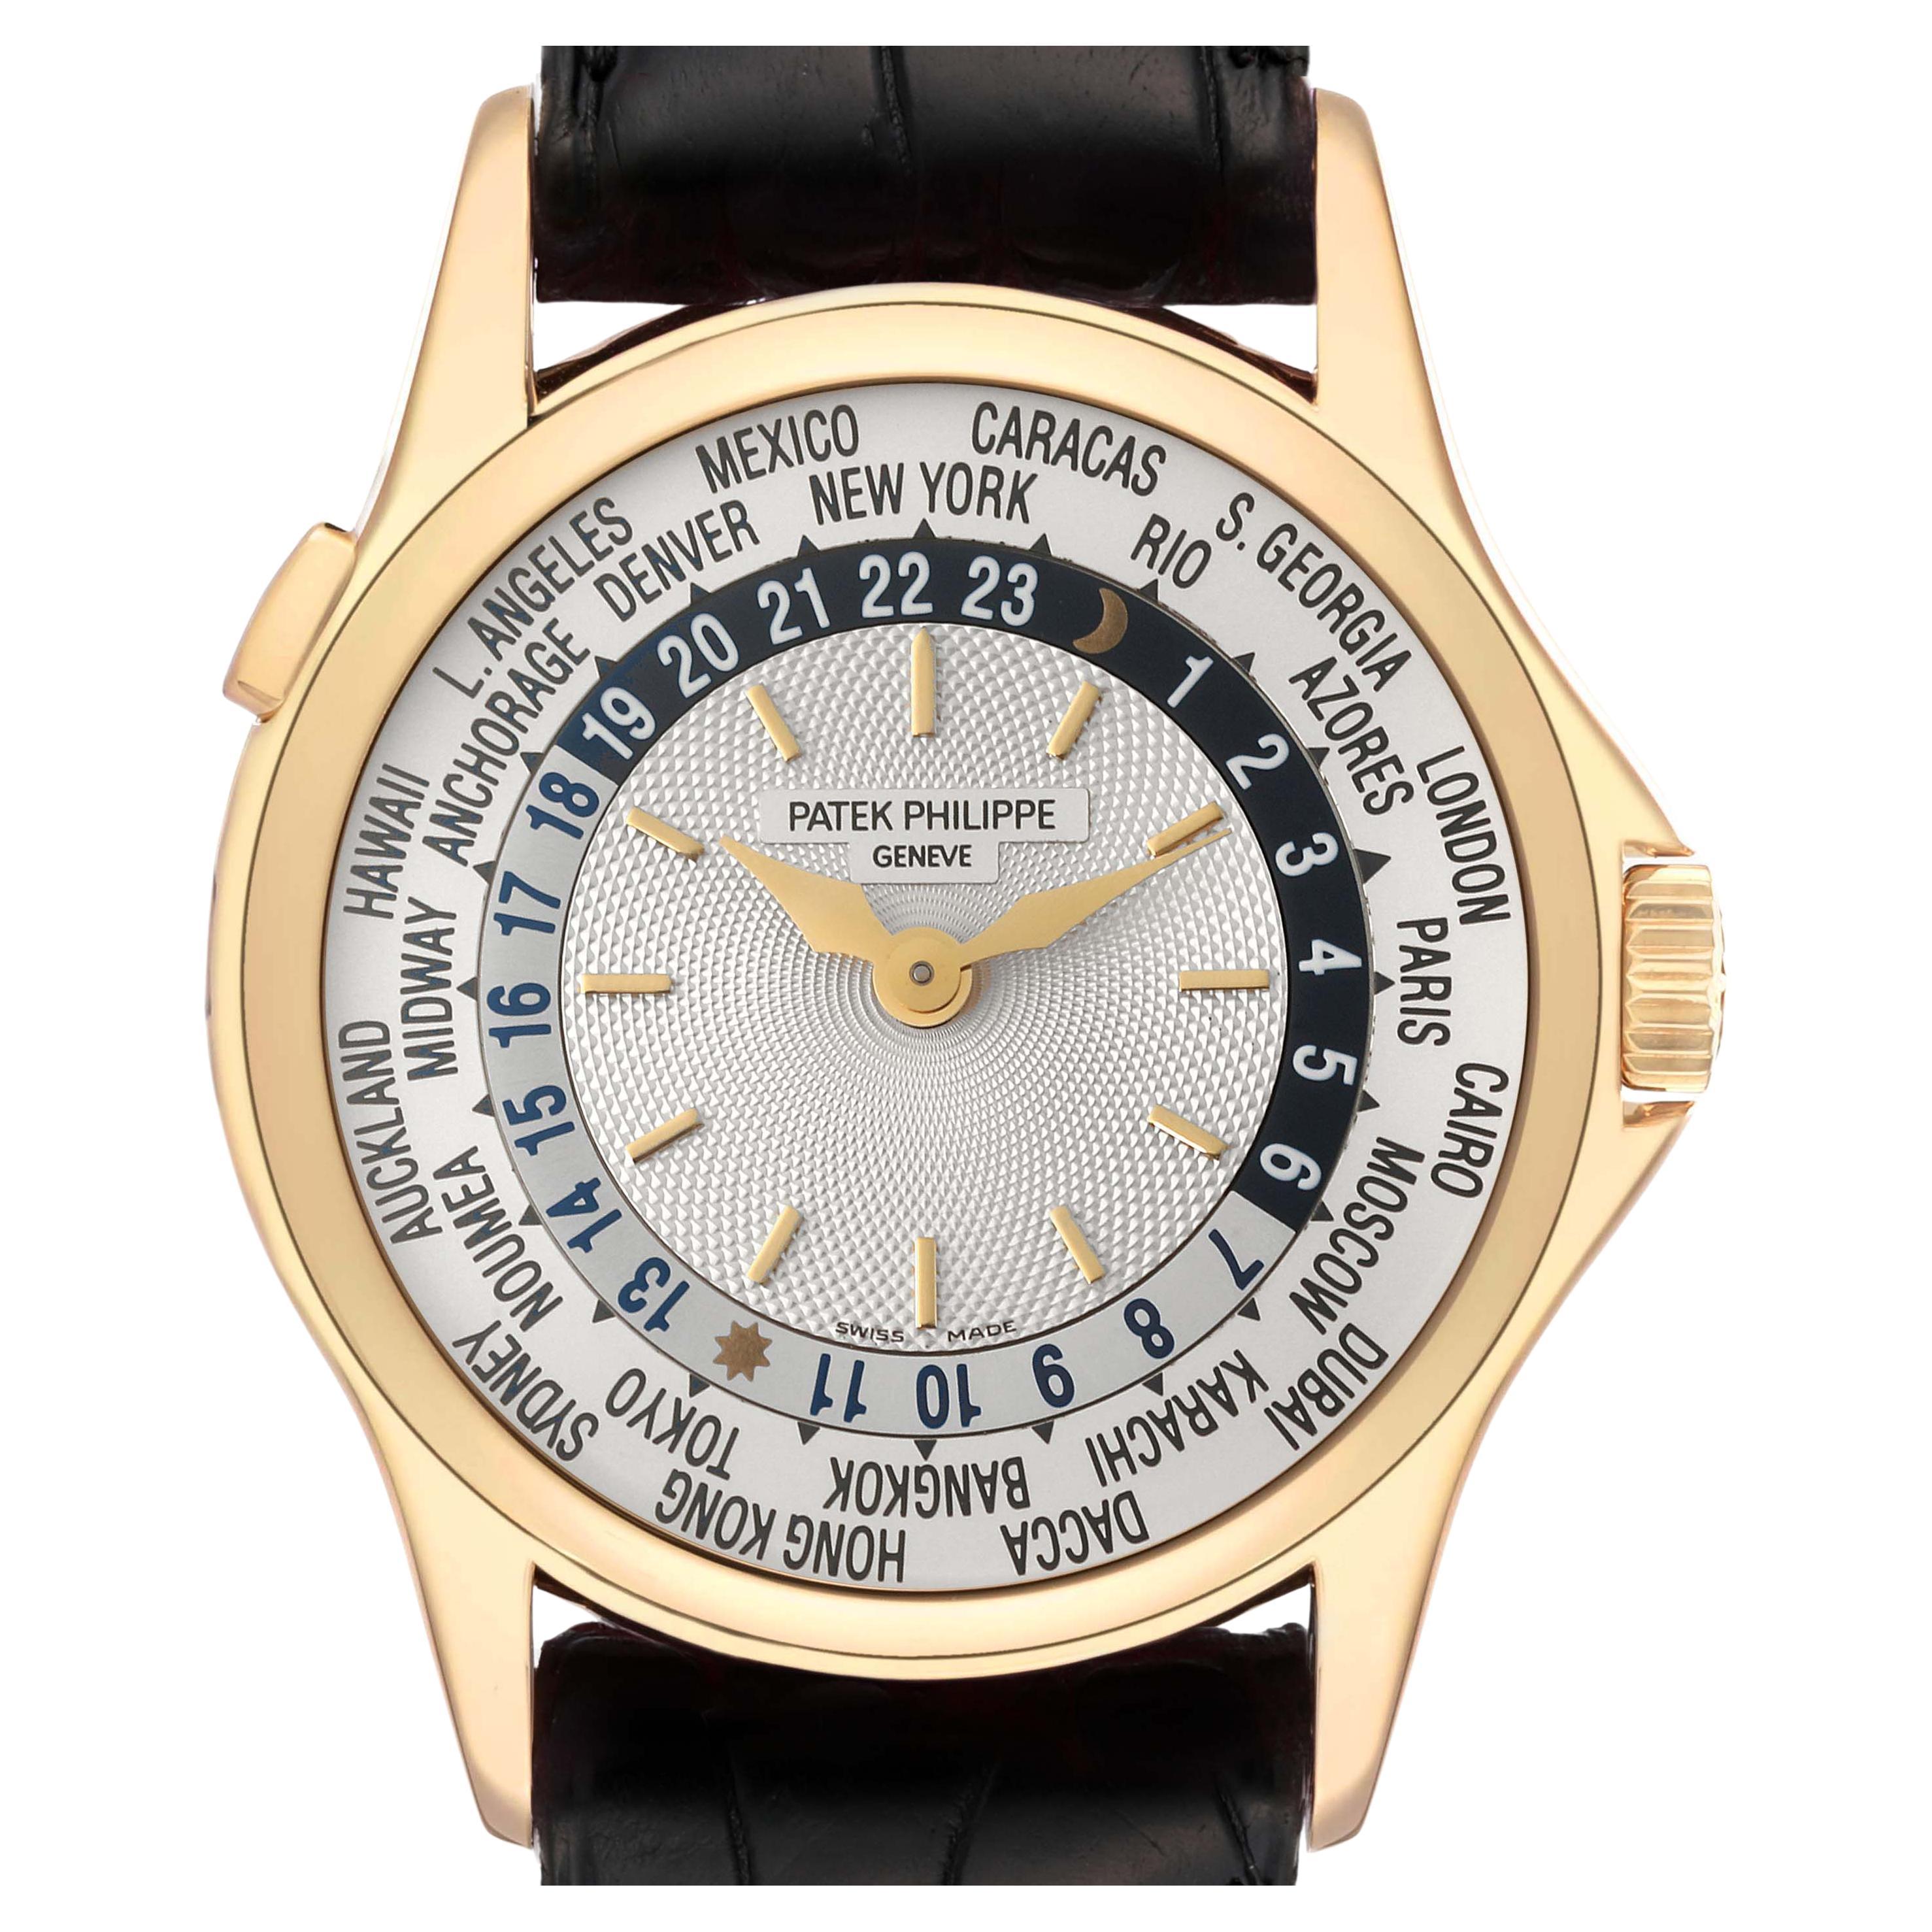 Patek Philippe World Time Complications Yellow Gold Mens Watch 5110